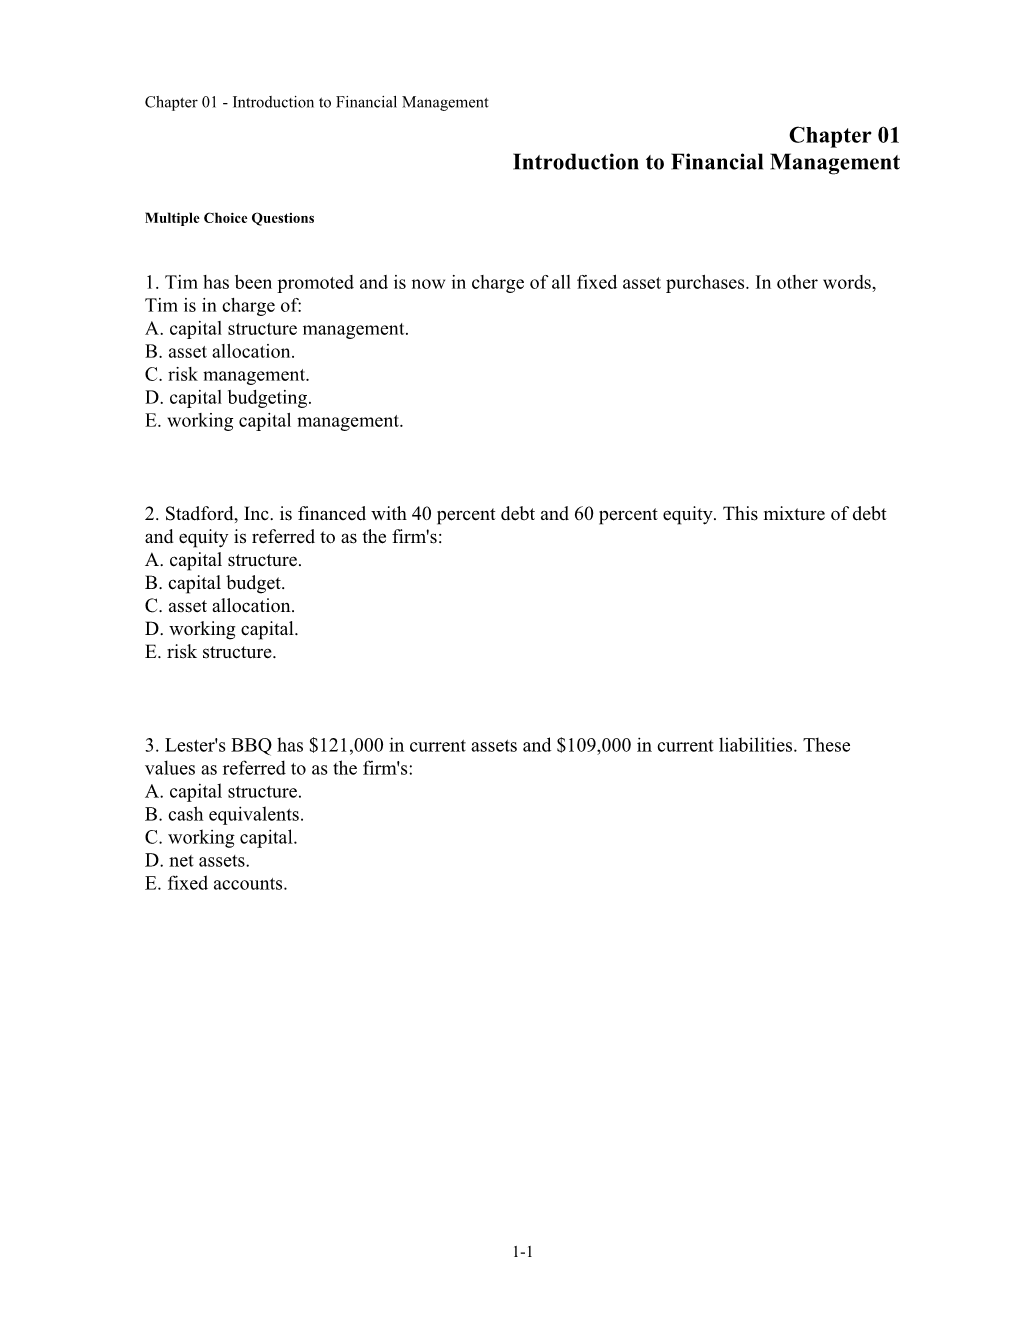 Chapter 01 Introduction to Financial Management